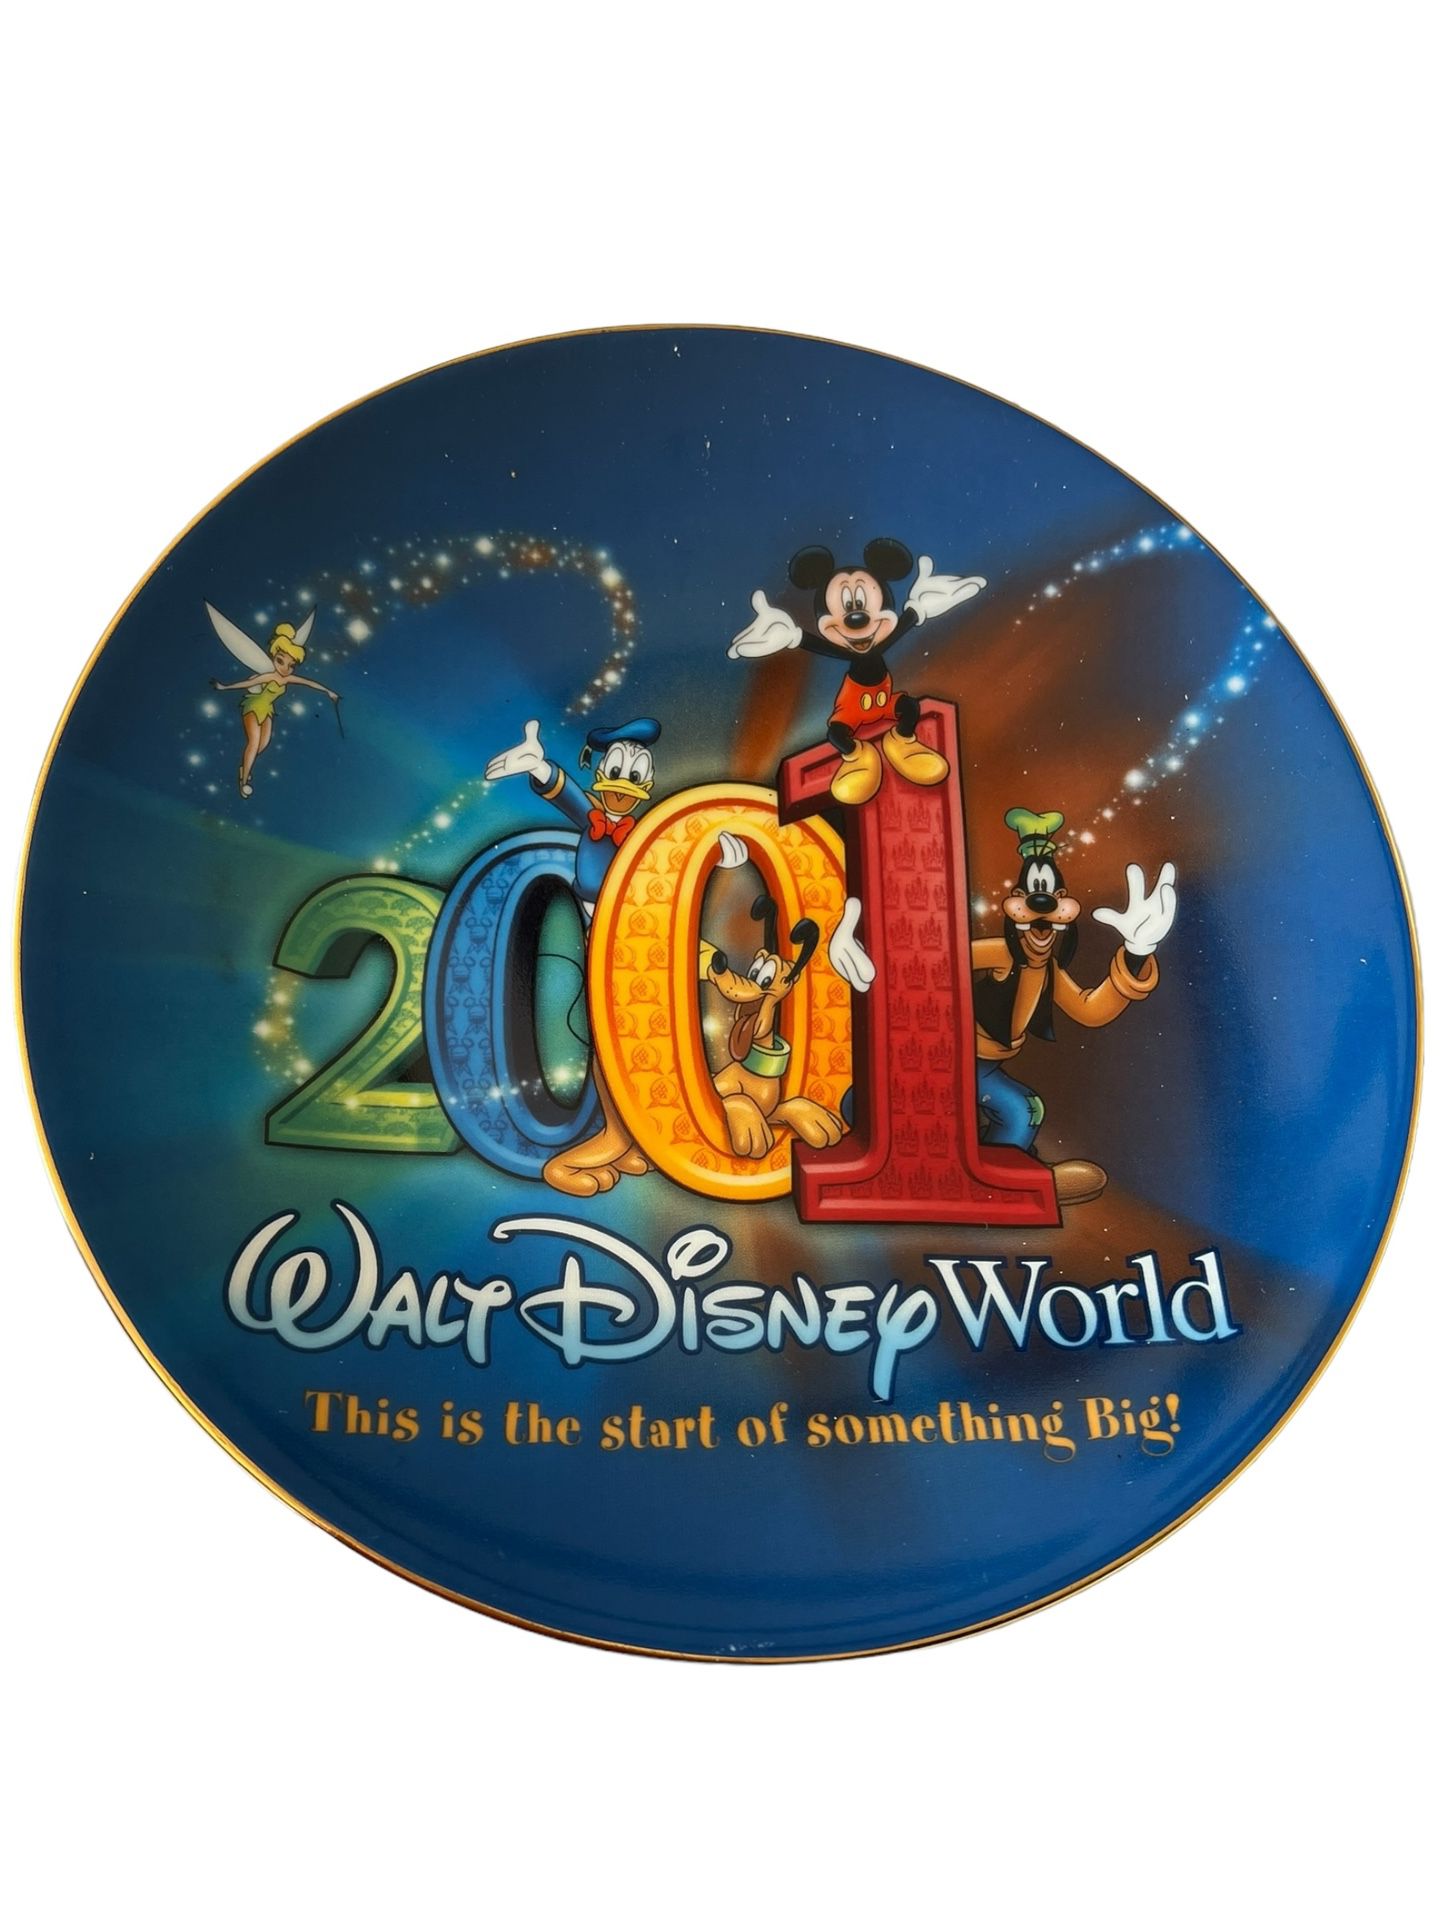 Walt Disney World 2001 Collectible Plate This Is the Start of Something Big!  Add this beautiful Walt Disney World 2001 Collector Plate to your collec